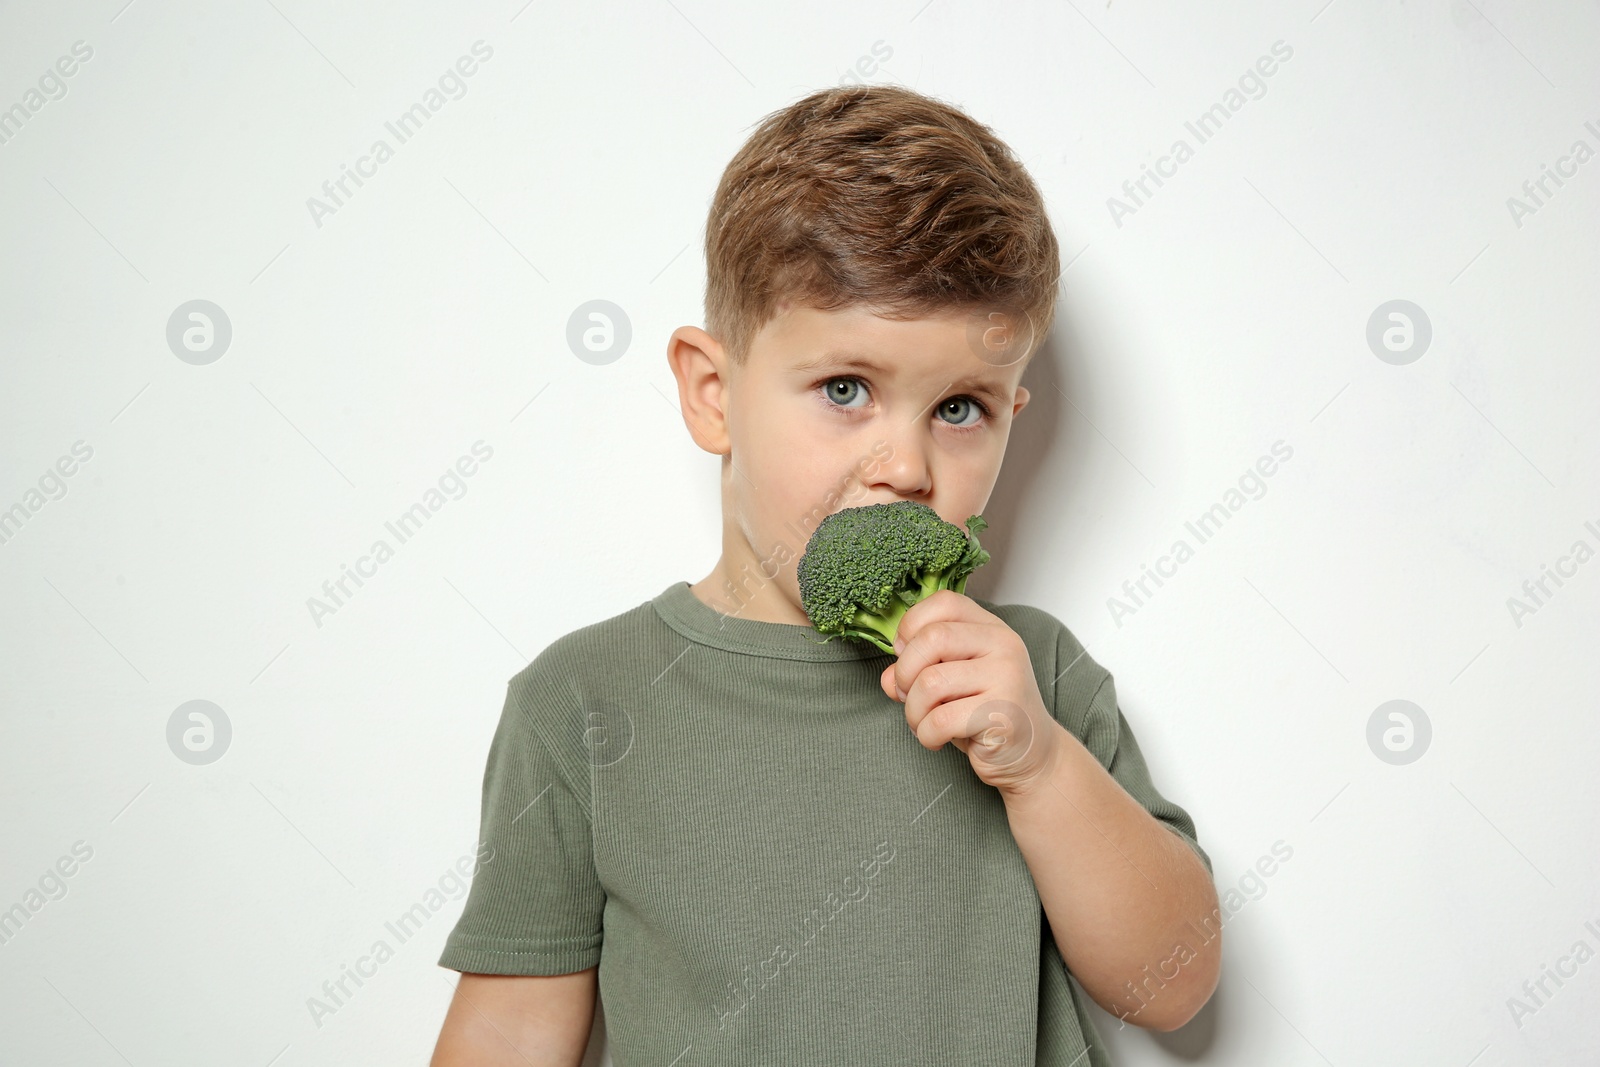 Photo of Adorable little boy eating broccoli on white background